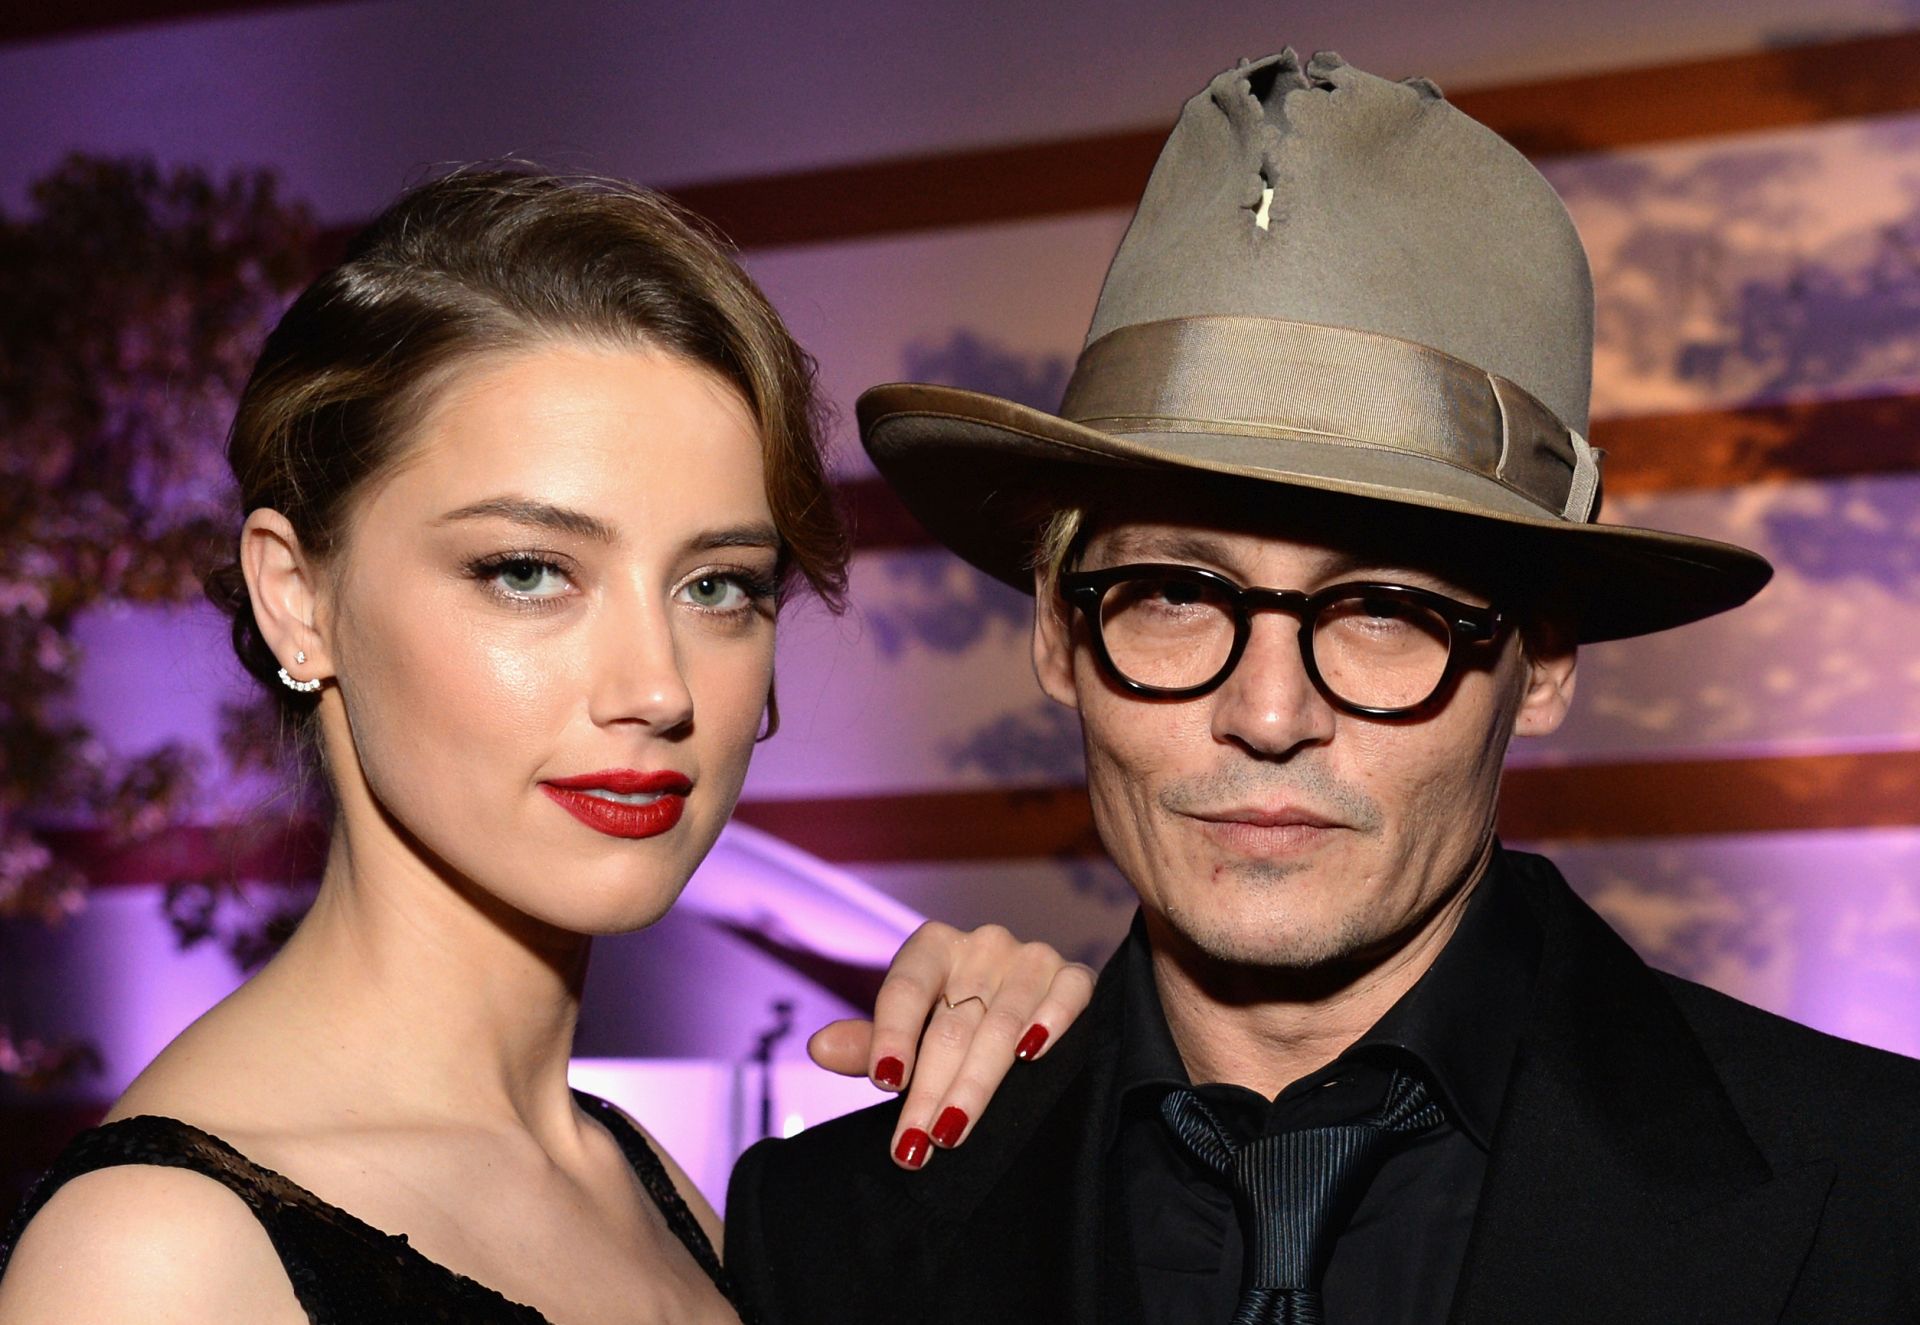 LOS ANGELES, CA - JANUARY 11:  Actors Amber Heard (L) and Johnny Depp attend The Art of Elysium's 7th Annual HEAVEN Gala presented by Mercedes-Benz at Skirball Cultural Center on January 11, 2014 in Los Angeles, California.  (Photo by Michael Kovac/Getty Images for Art of Elysium)